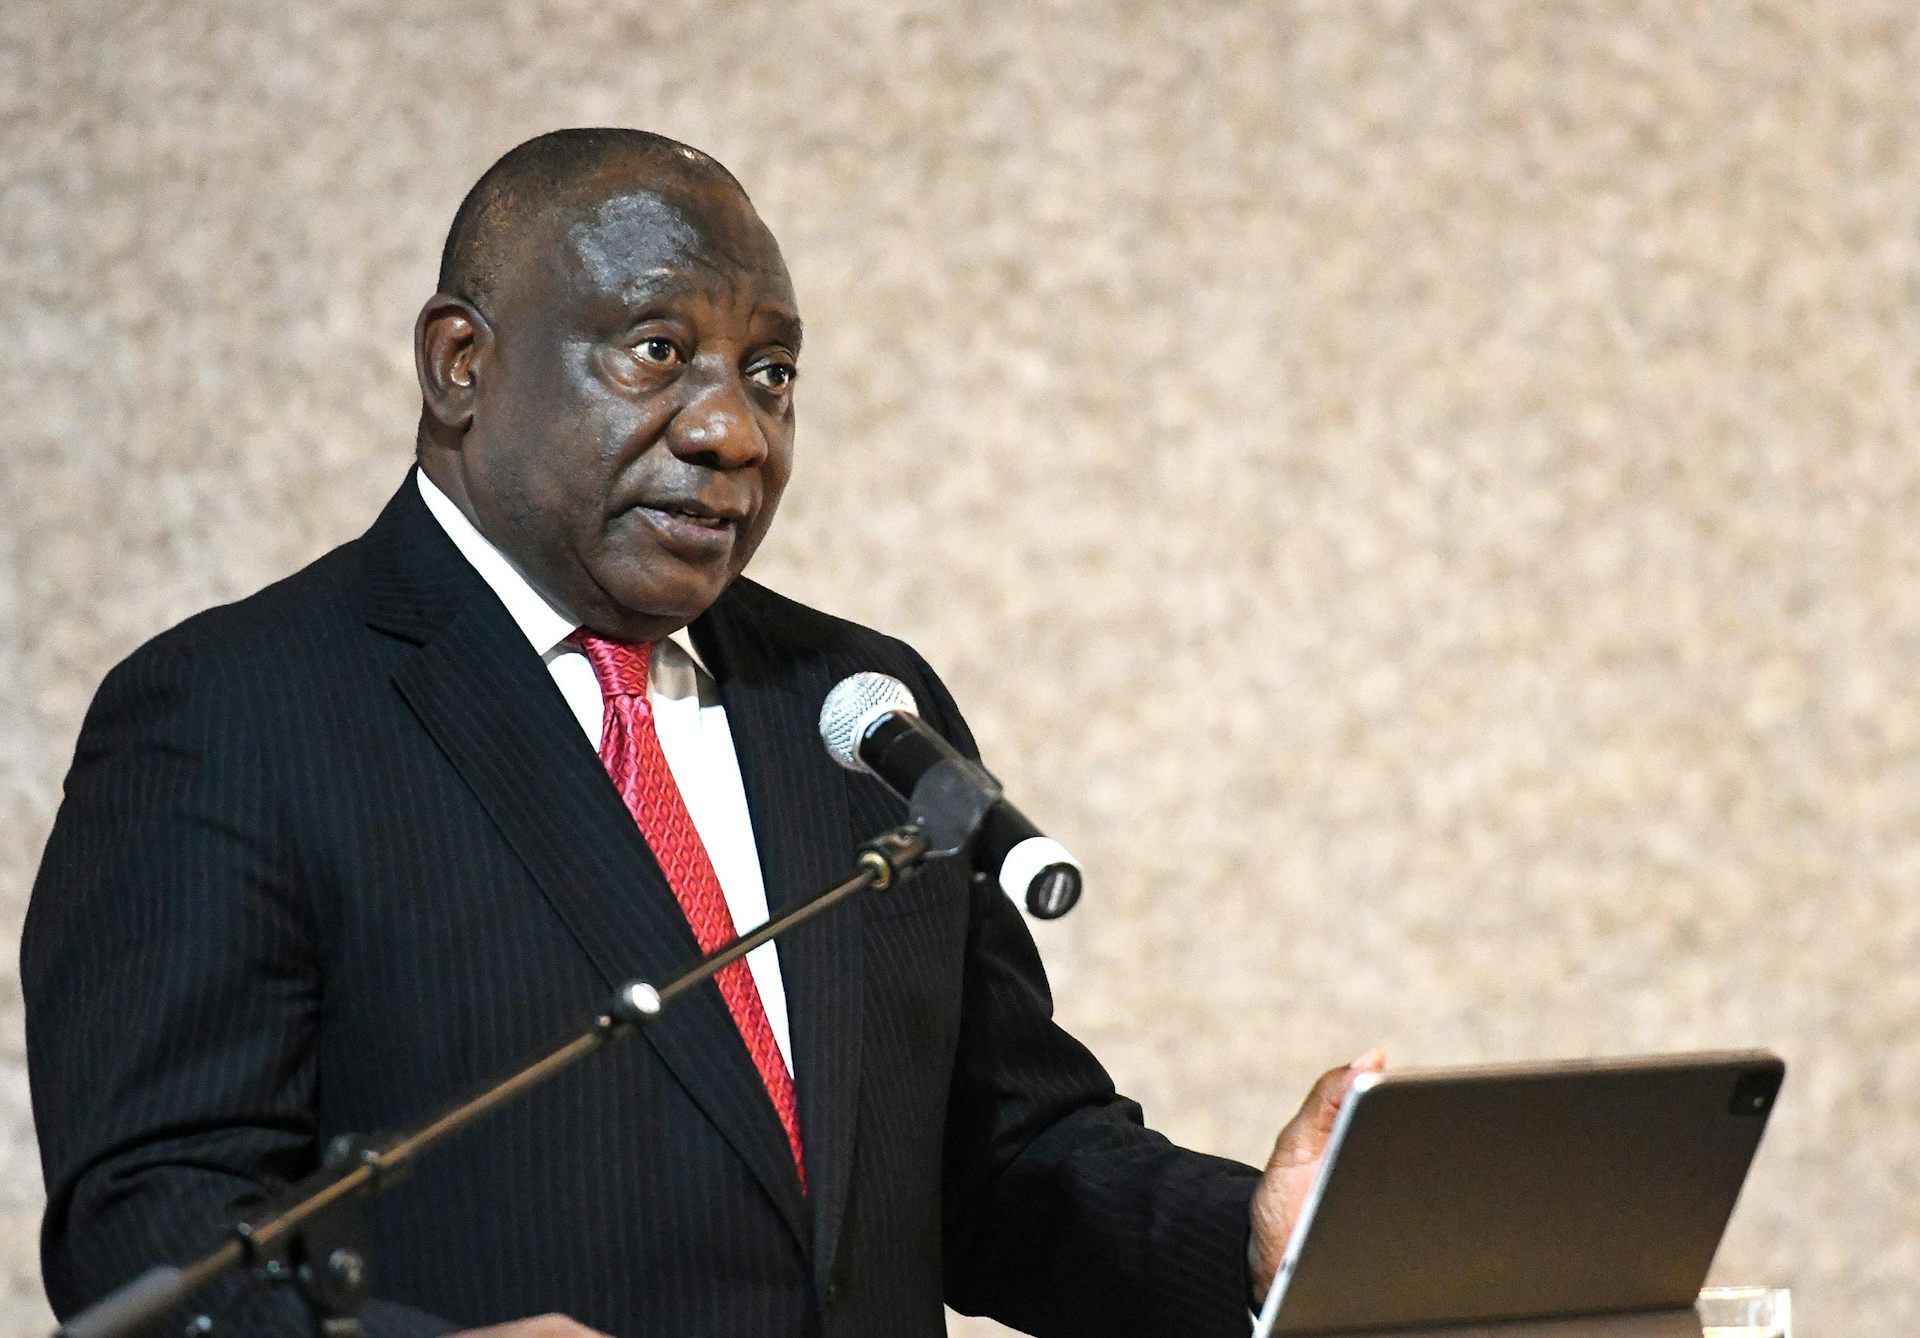 South African President Cyril Ramaphosa’s Credibility Has Been Dented, Putting His Reform Agenda in Jeopardy